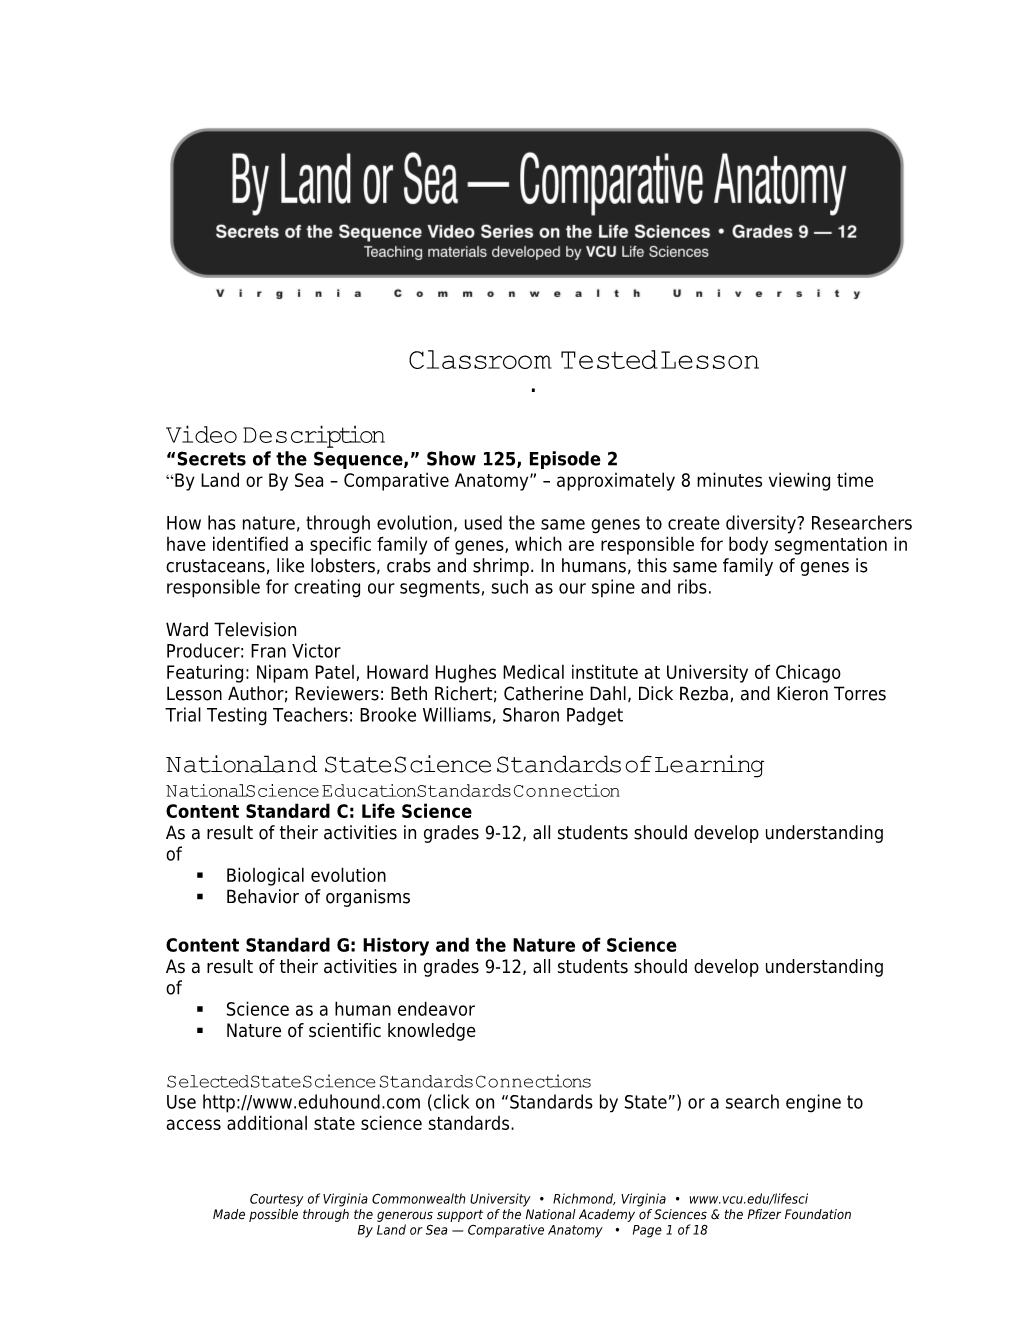 By Land Or by Sea-Comparative Anatomy